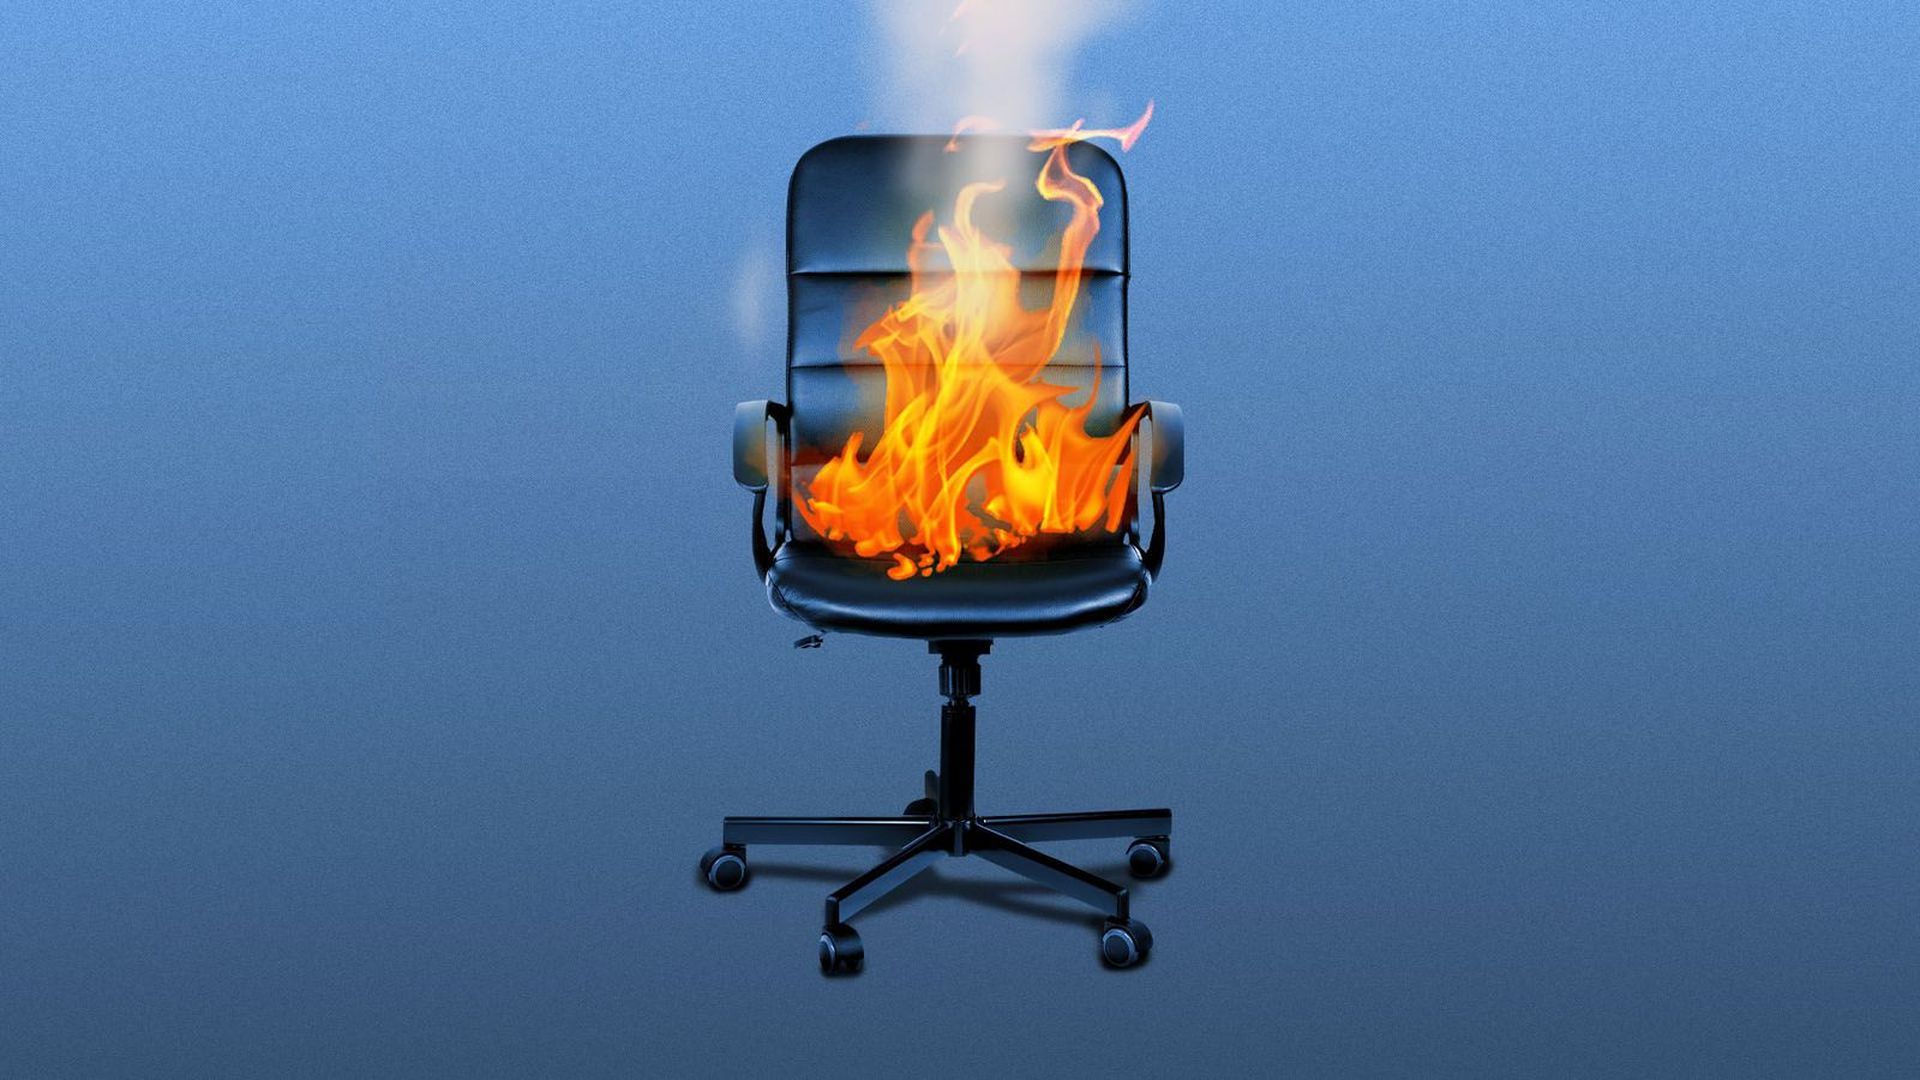 Illustration of an office chair with a fire burning in the seat